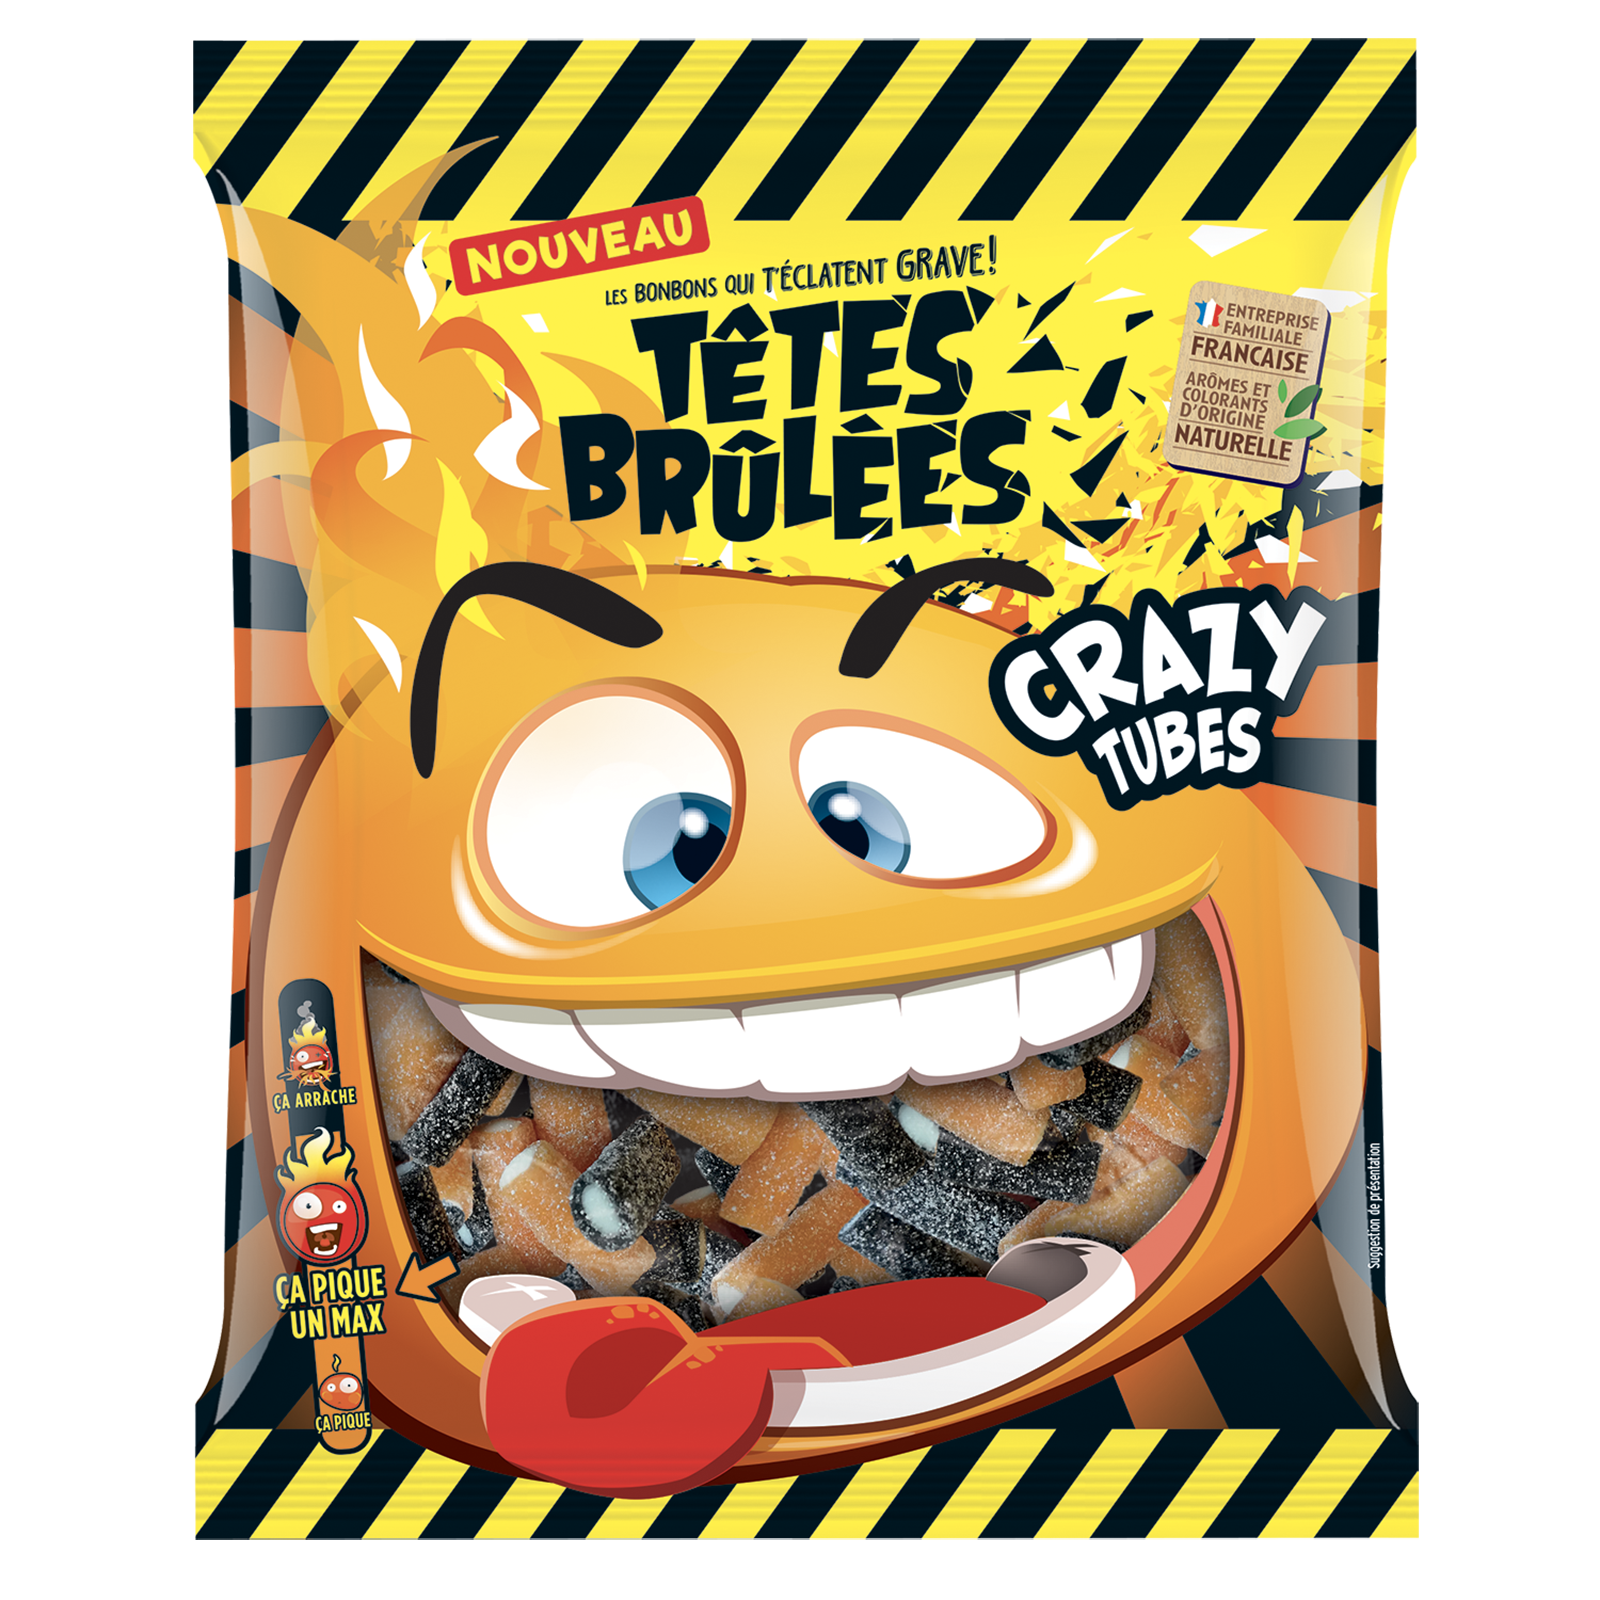 https://www.tetes-brulees.fr/wp-content/uploads/2023/03/Crazy-tubes-recto-clean_001.png